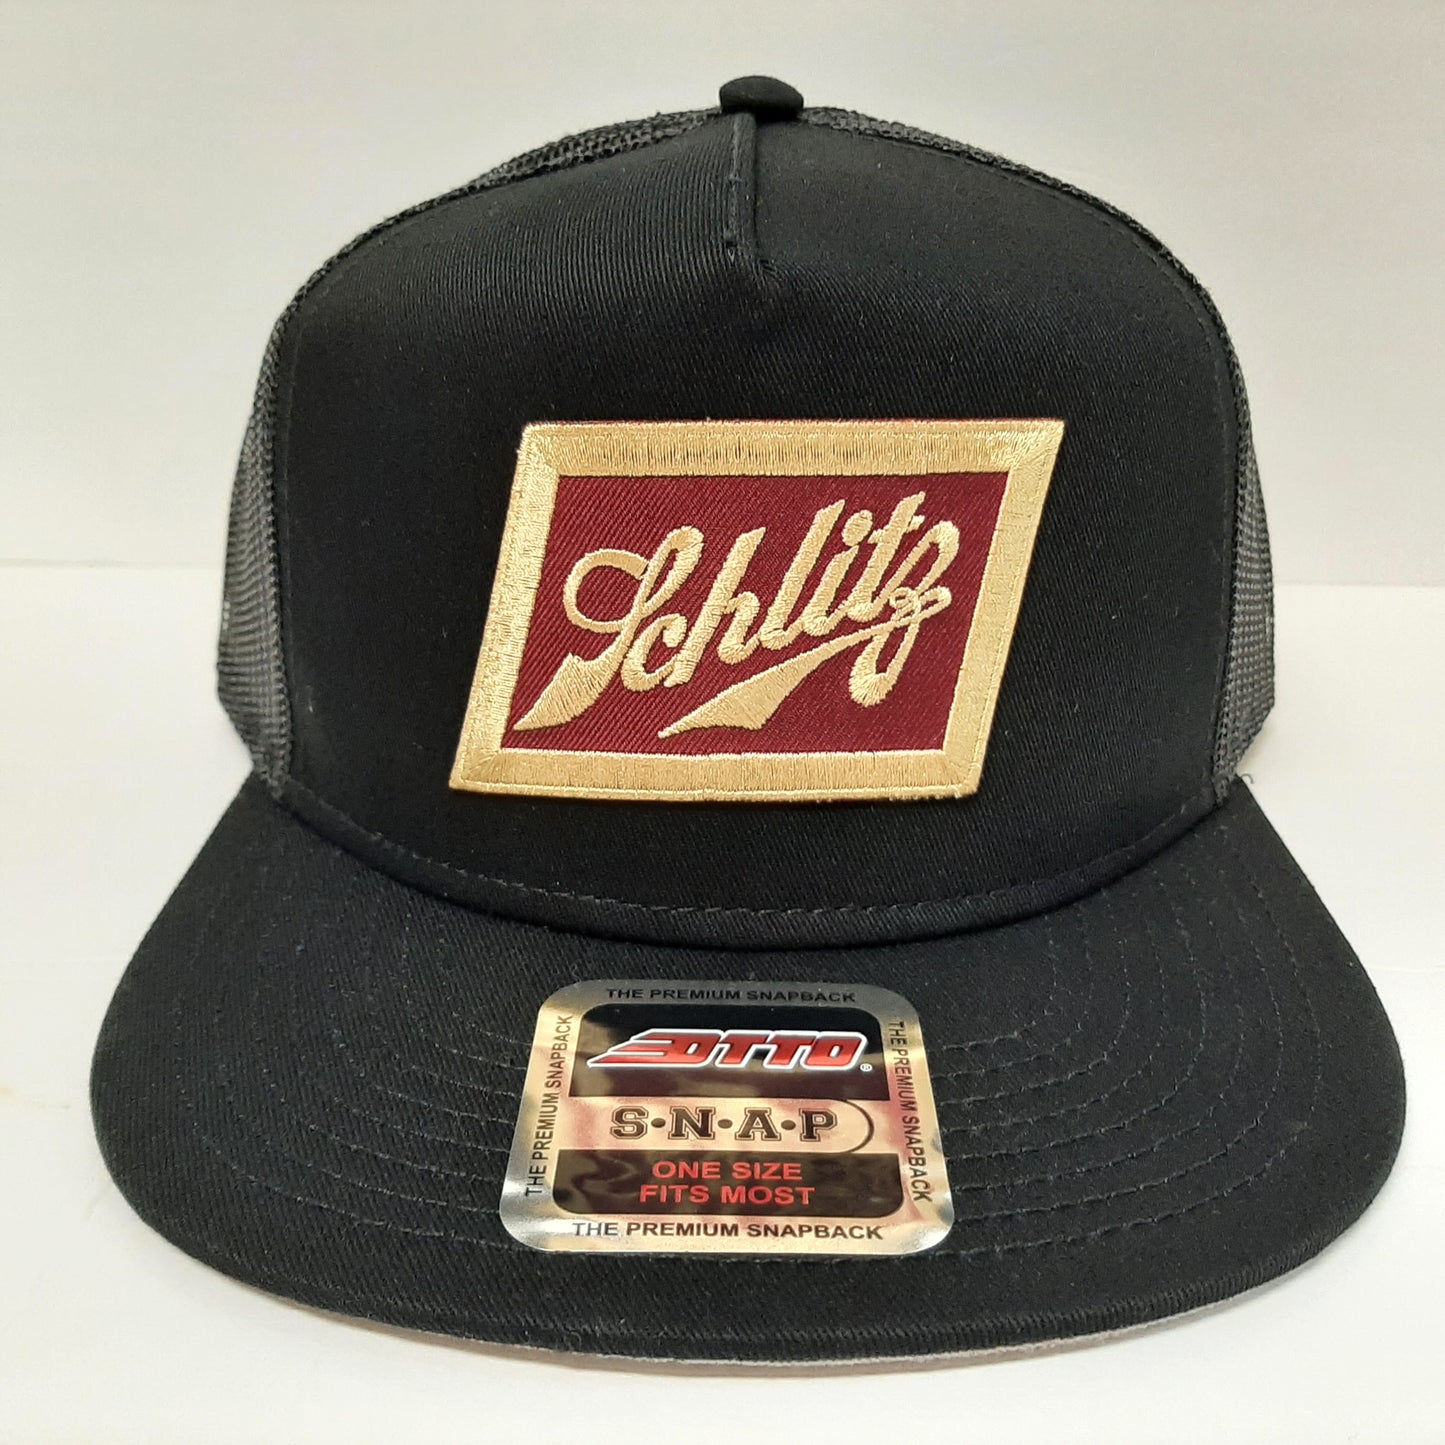 Schlitz Beer Embroidered Patch Flat Bill Snapback Mesh Hat Cap OTTO